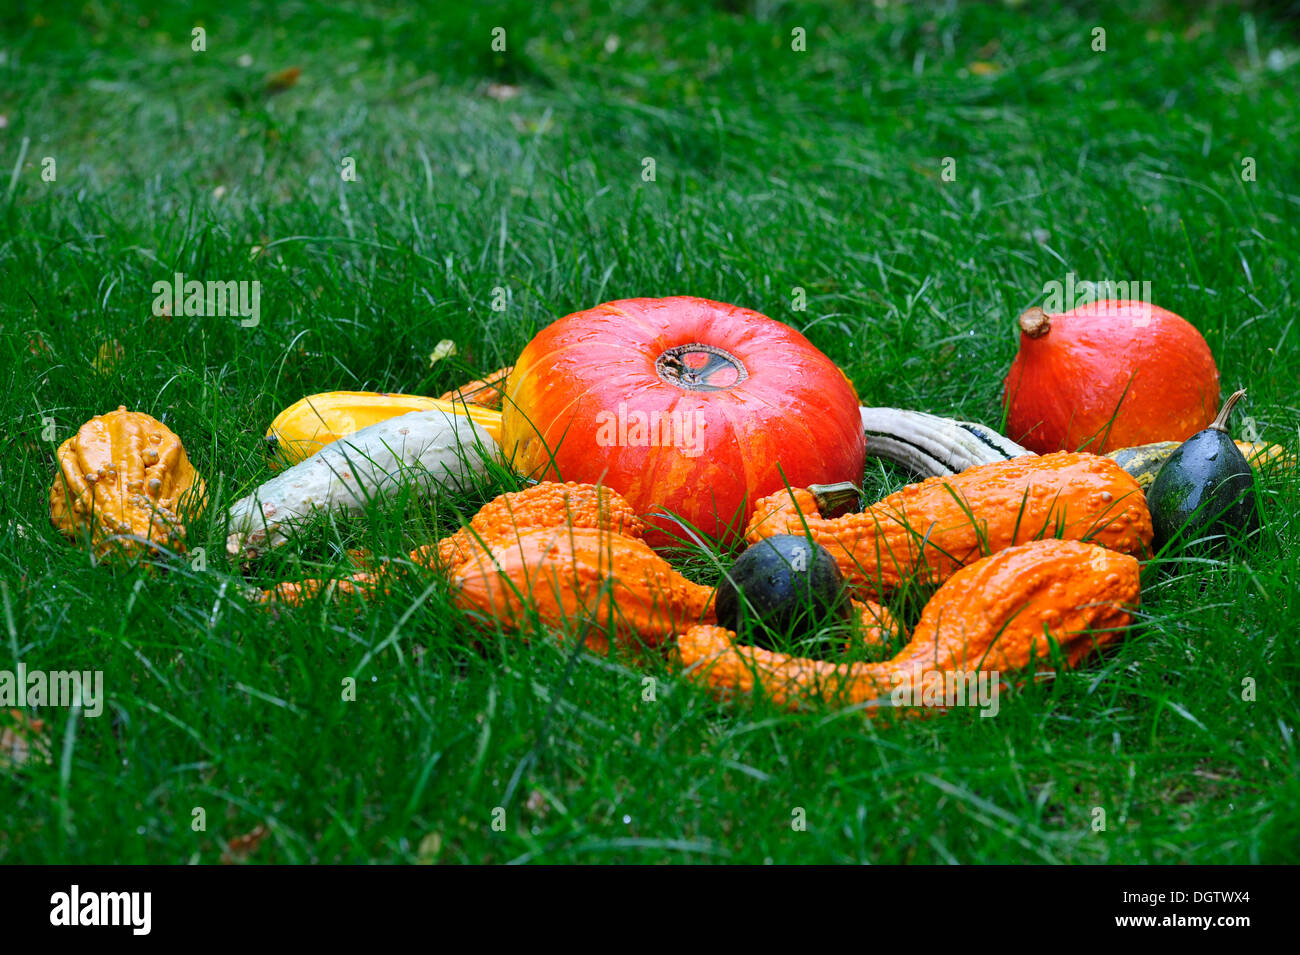 A large collection of pumpkins set Stock Photo